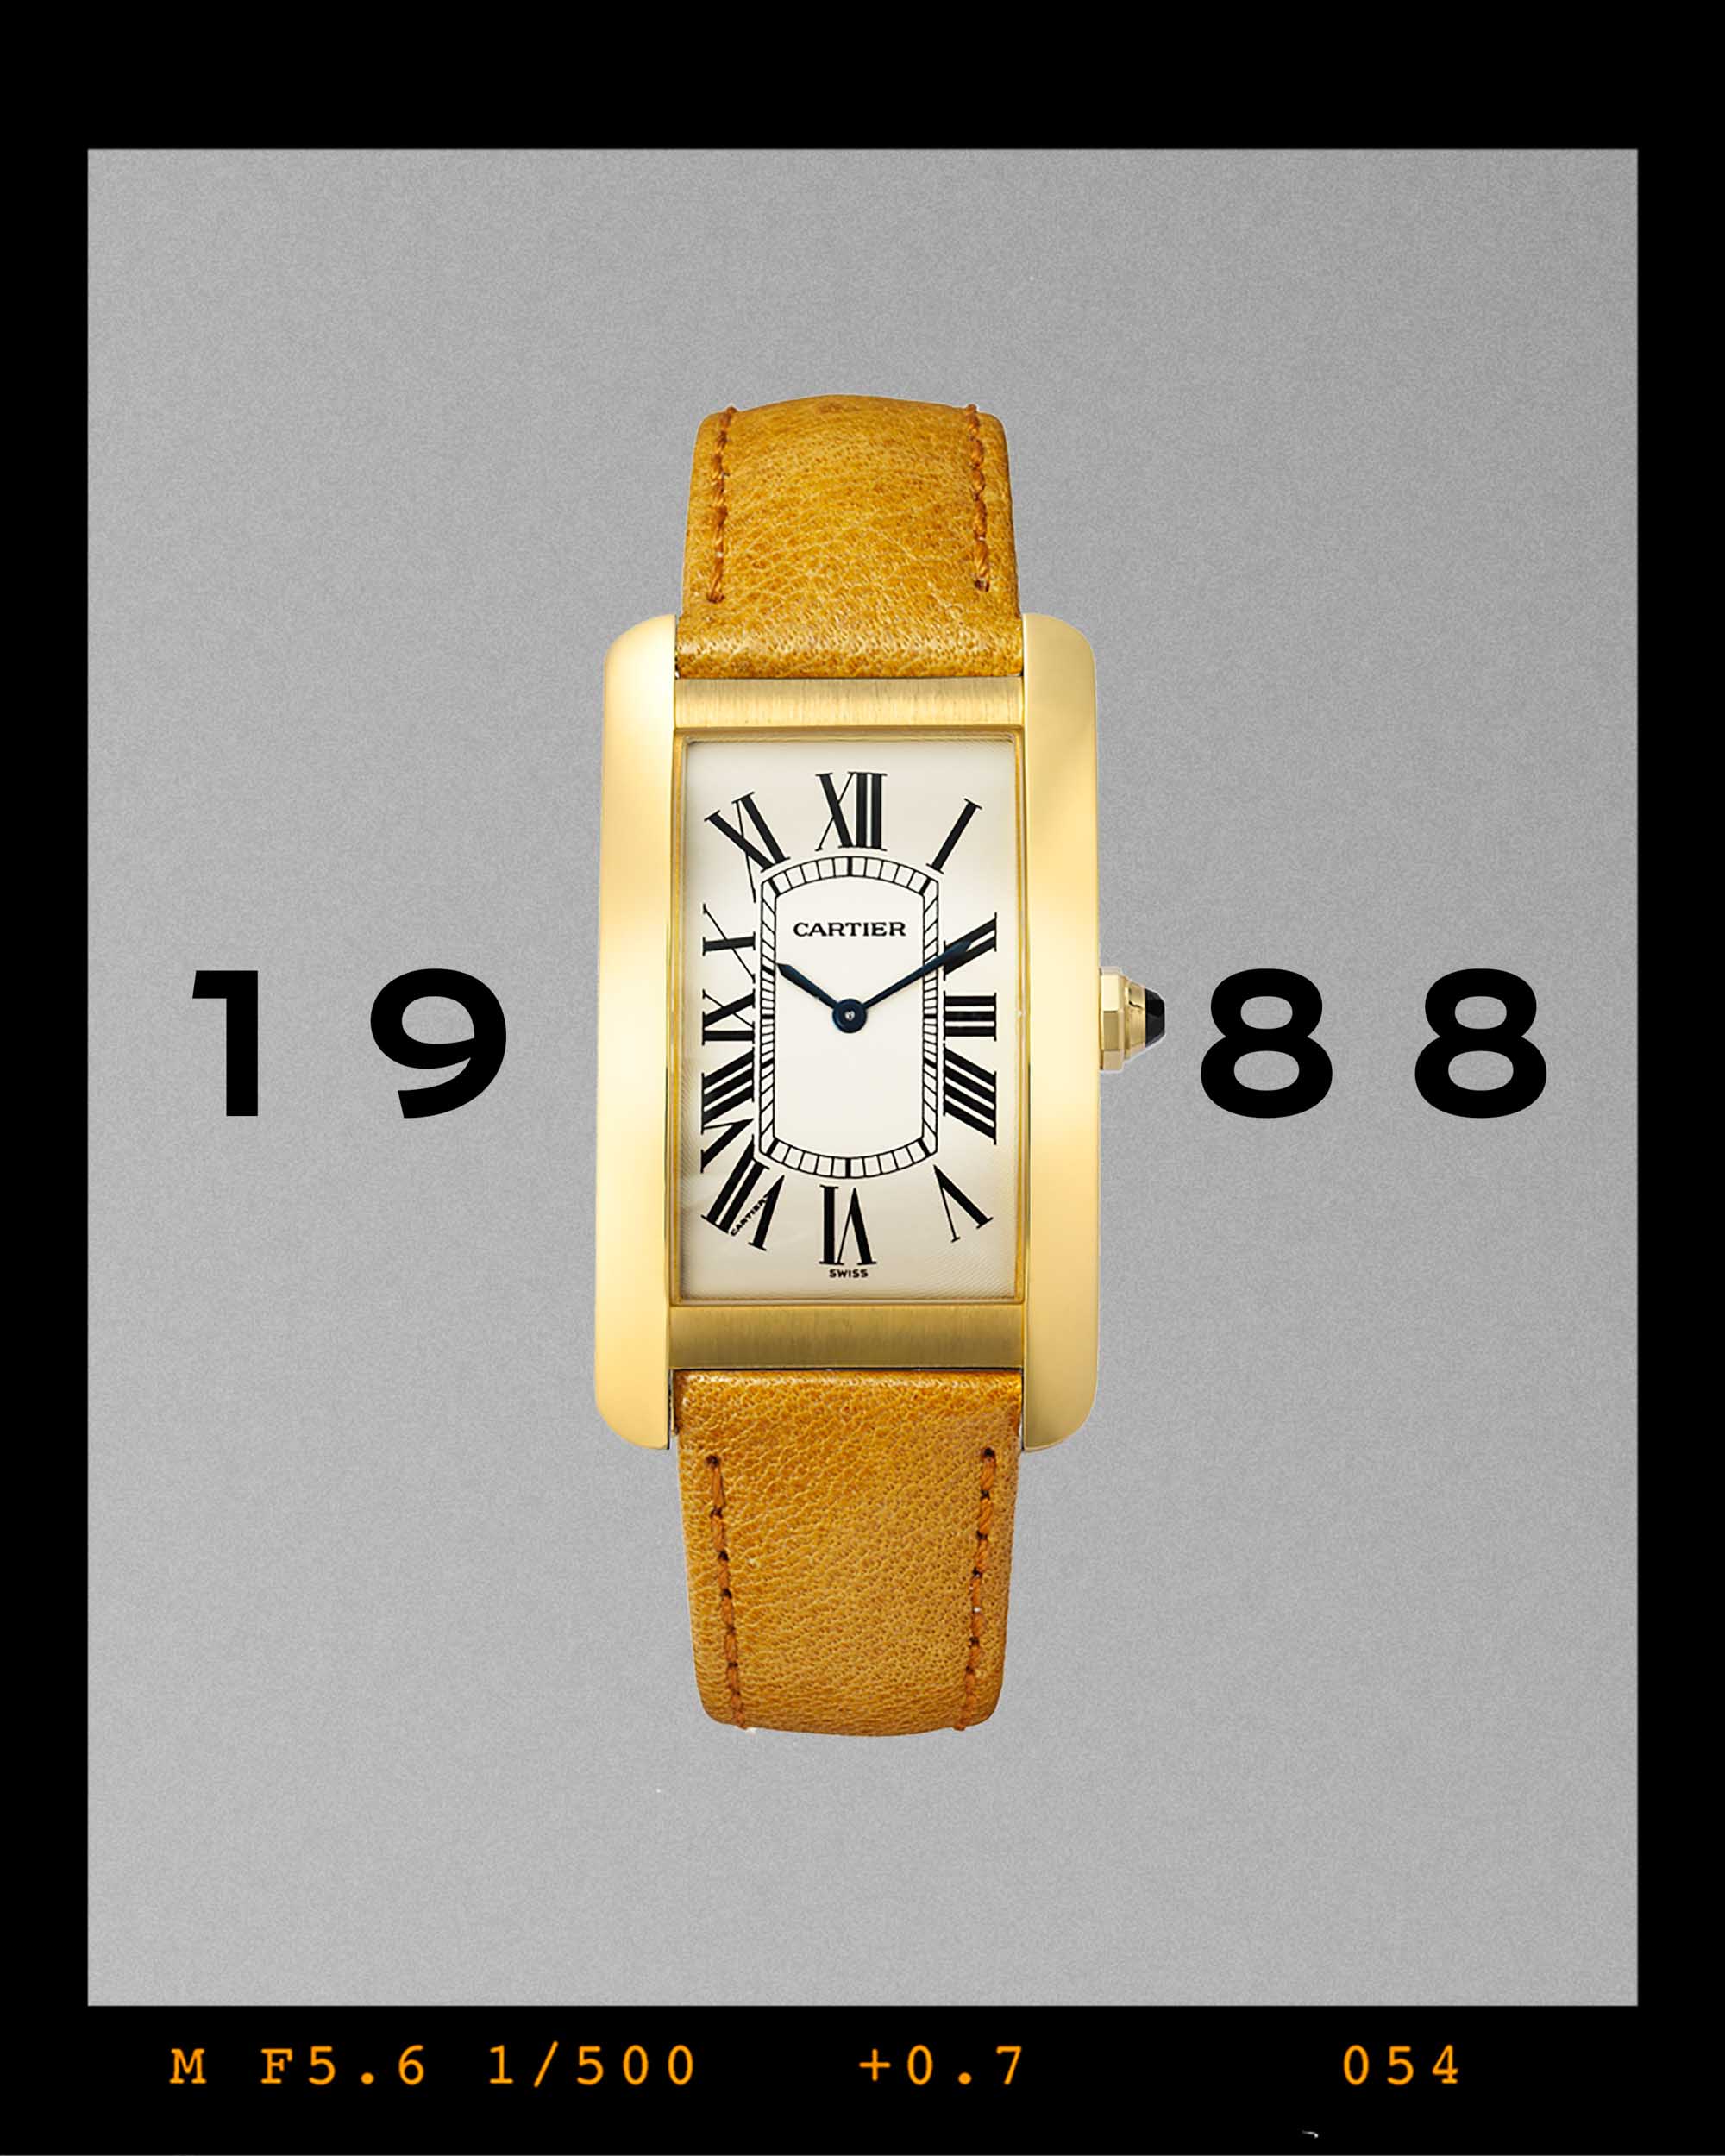 WCL 131 A93 Cartier TANK Tank Americaine